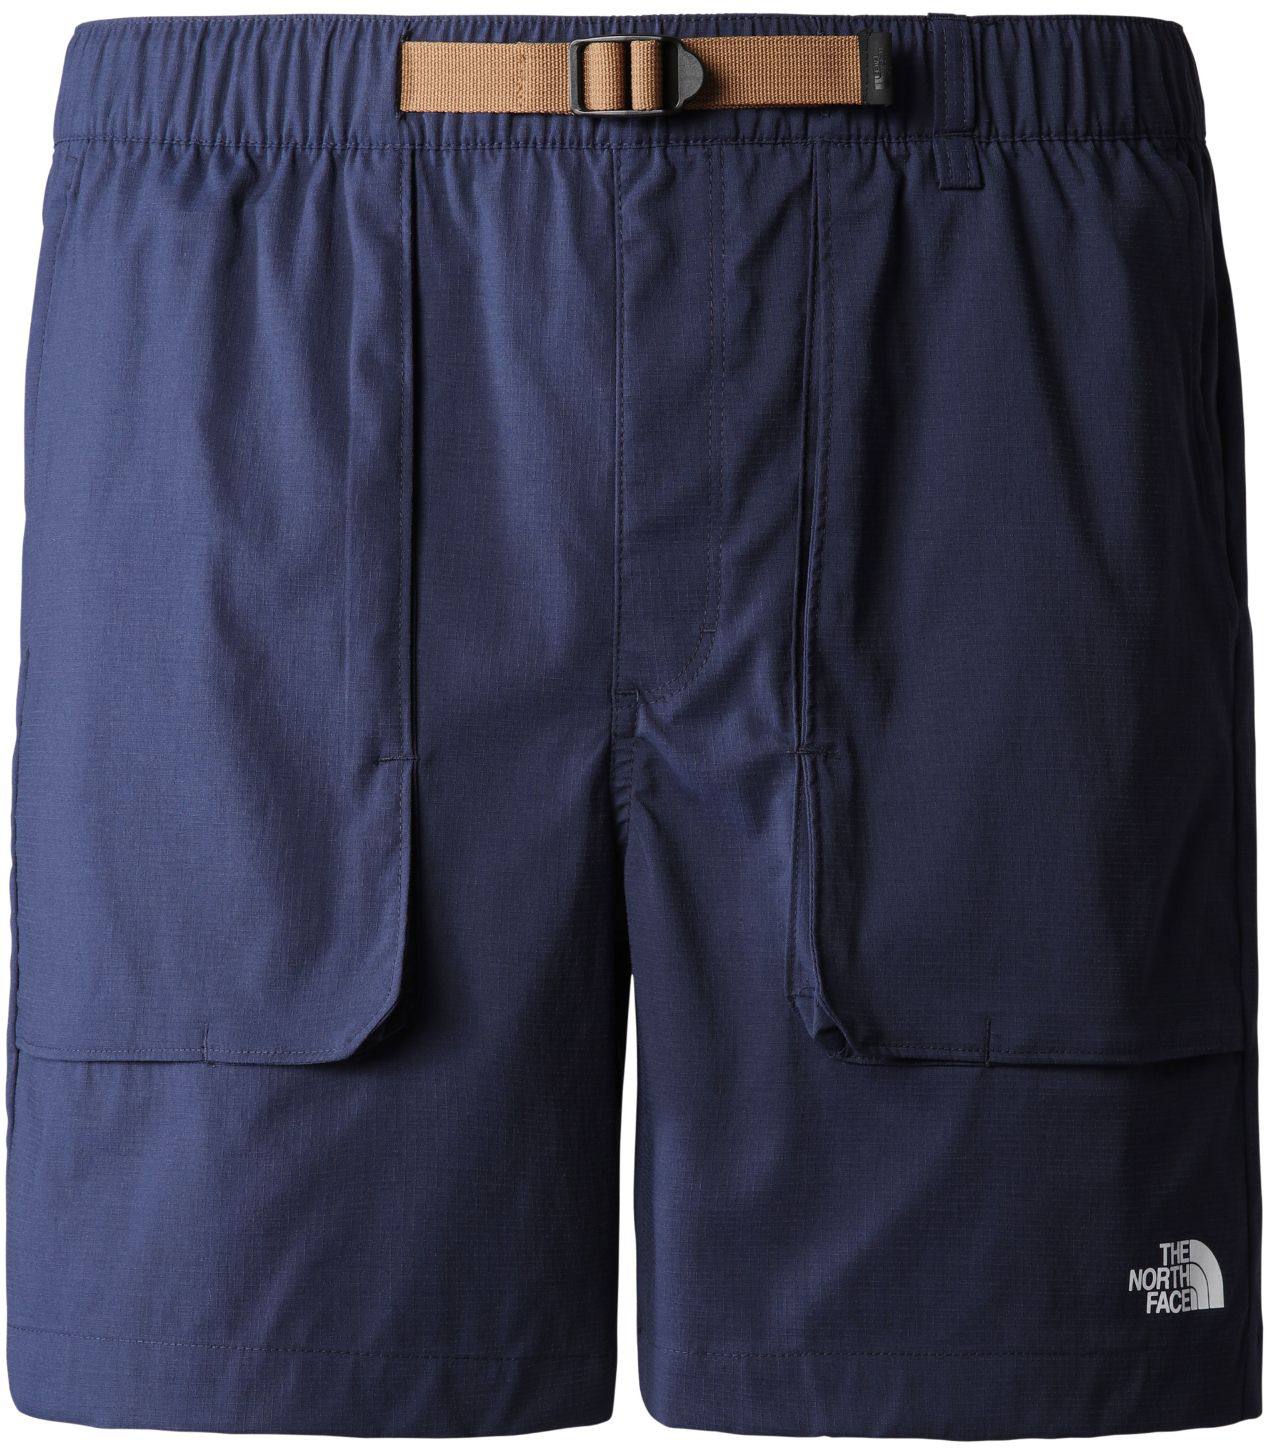 The North Face Men’s Class V Ripstop Shorts